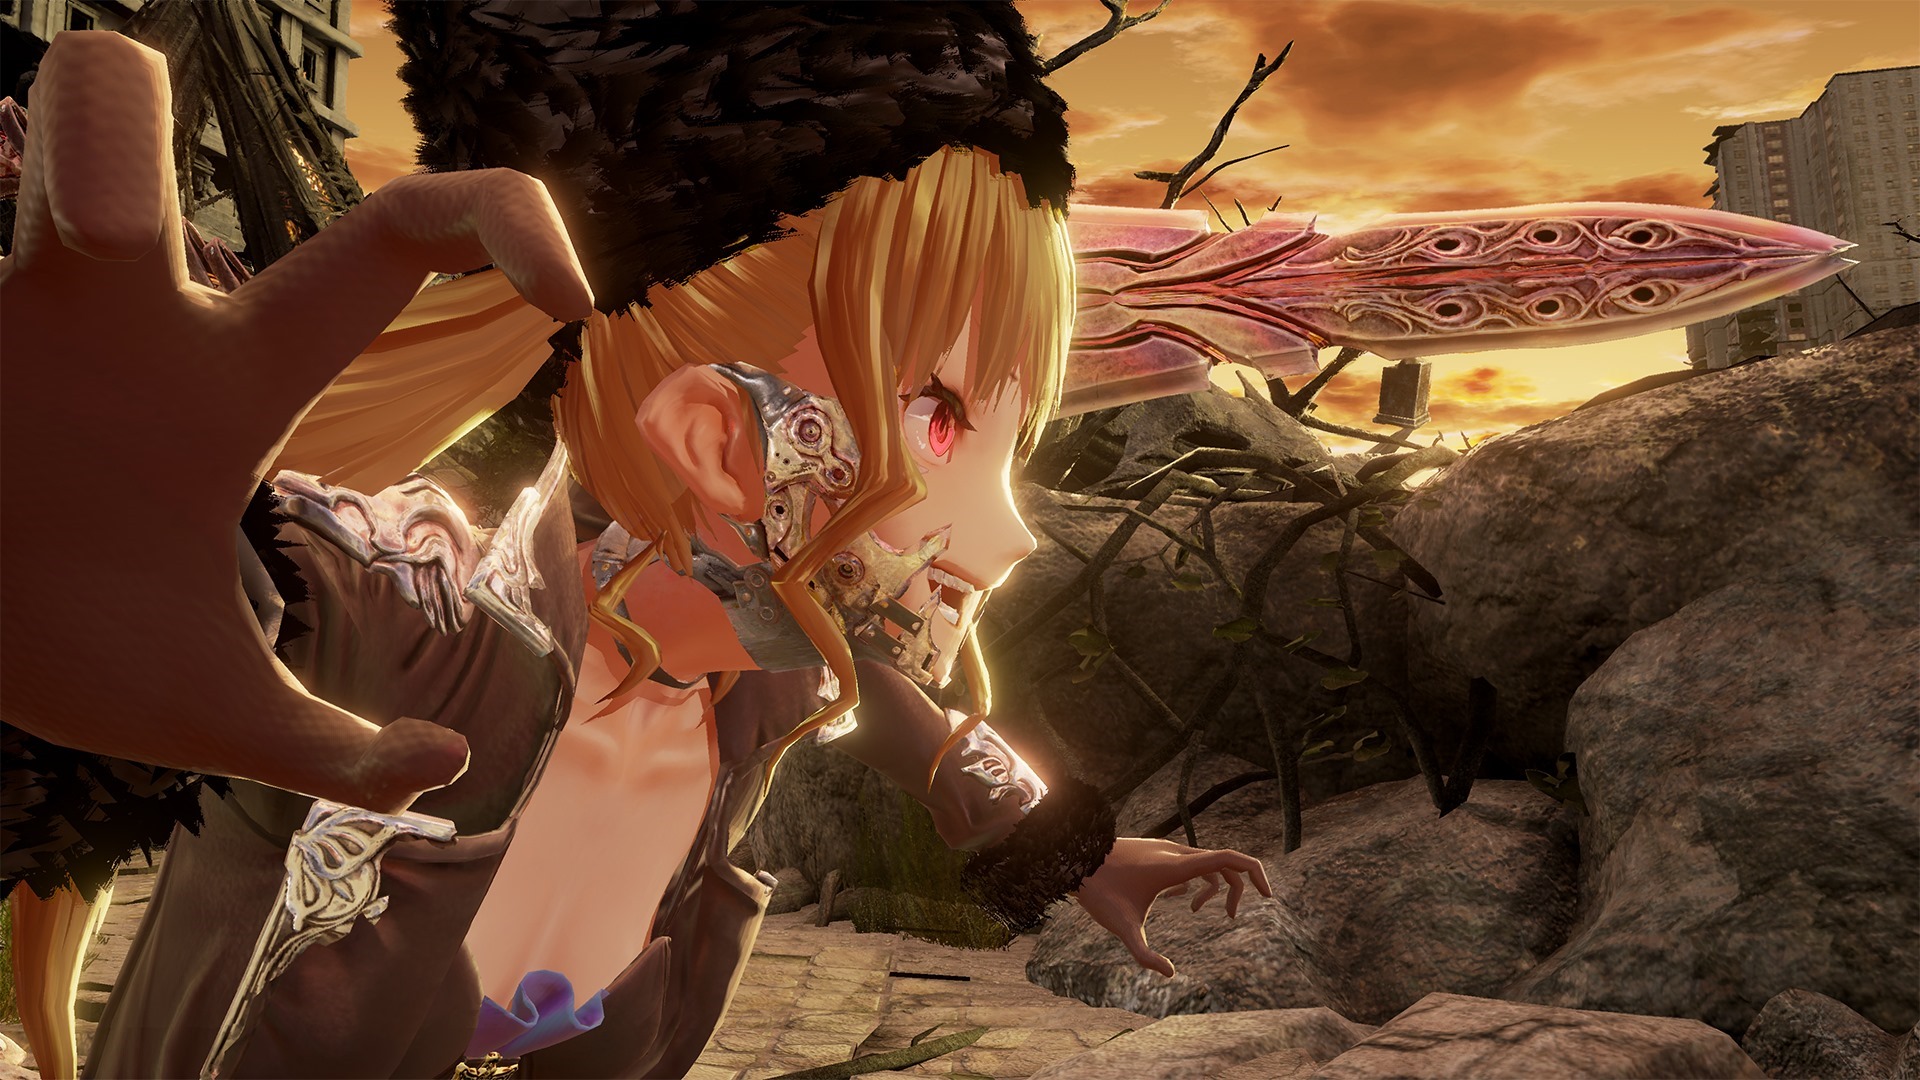 Code Vein Gets 13 Minutes of New Gameplay Footage